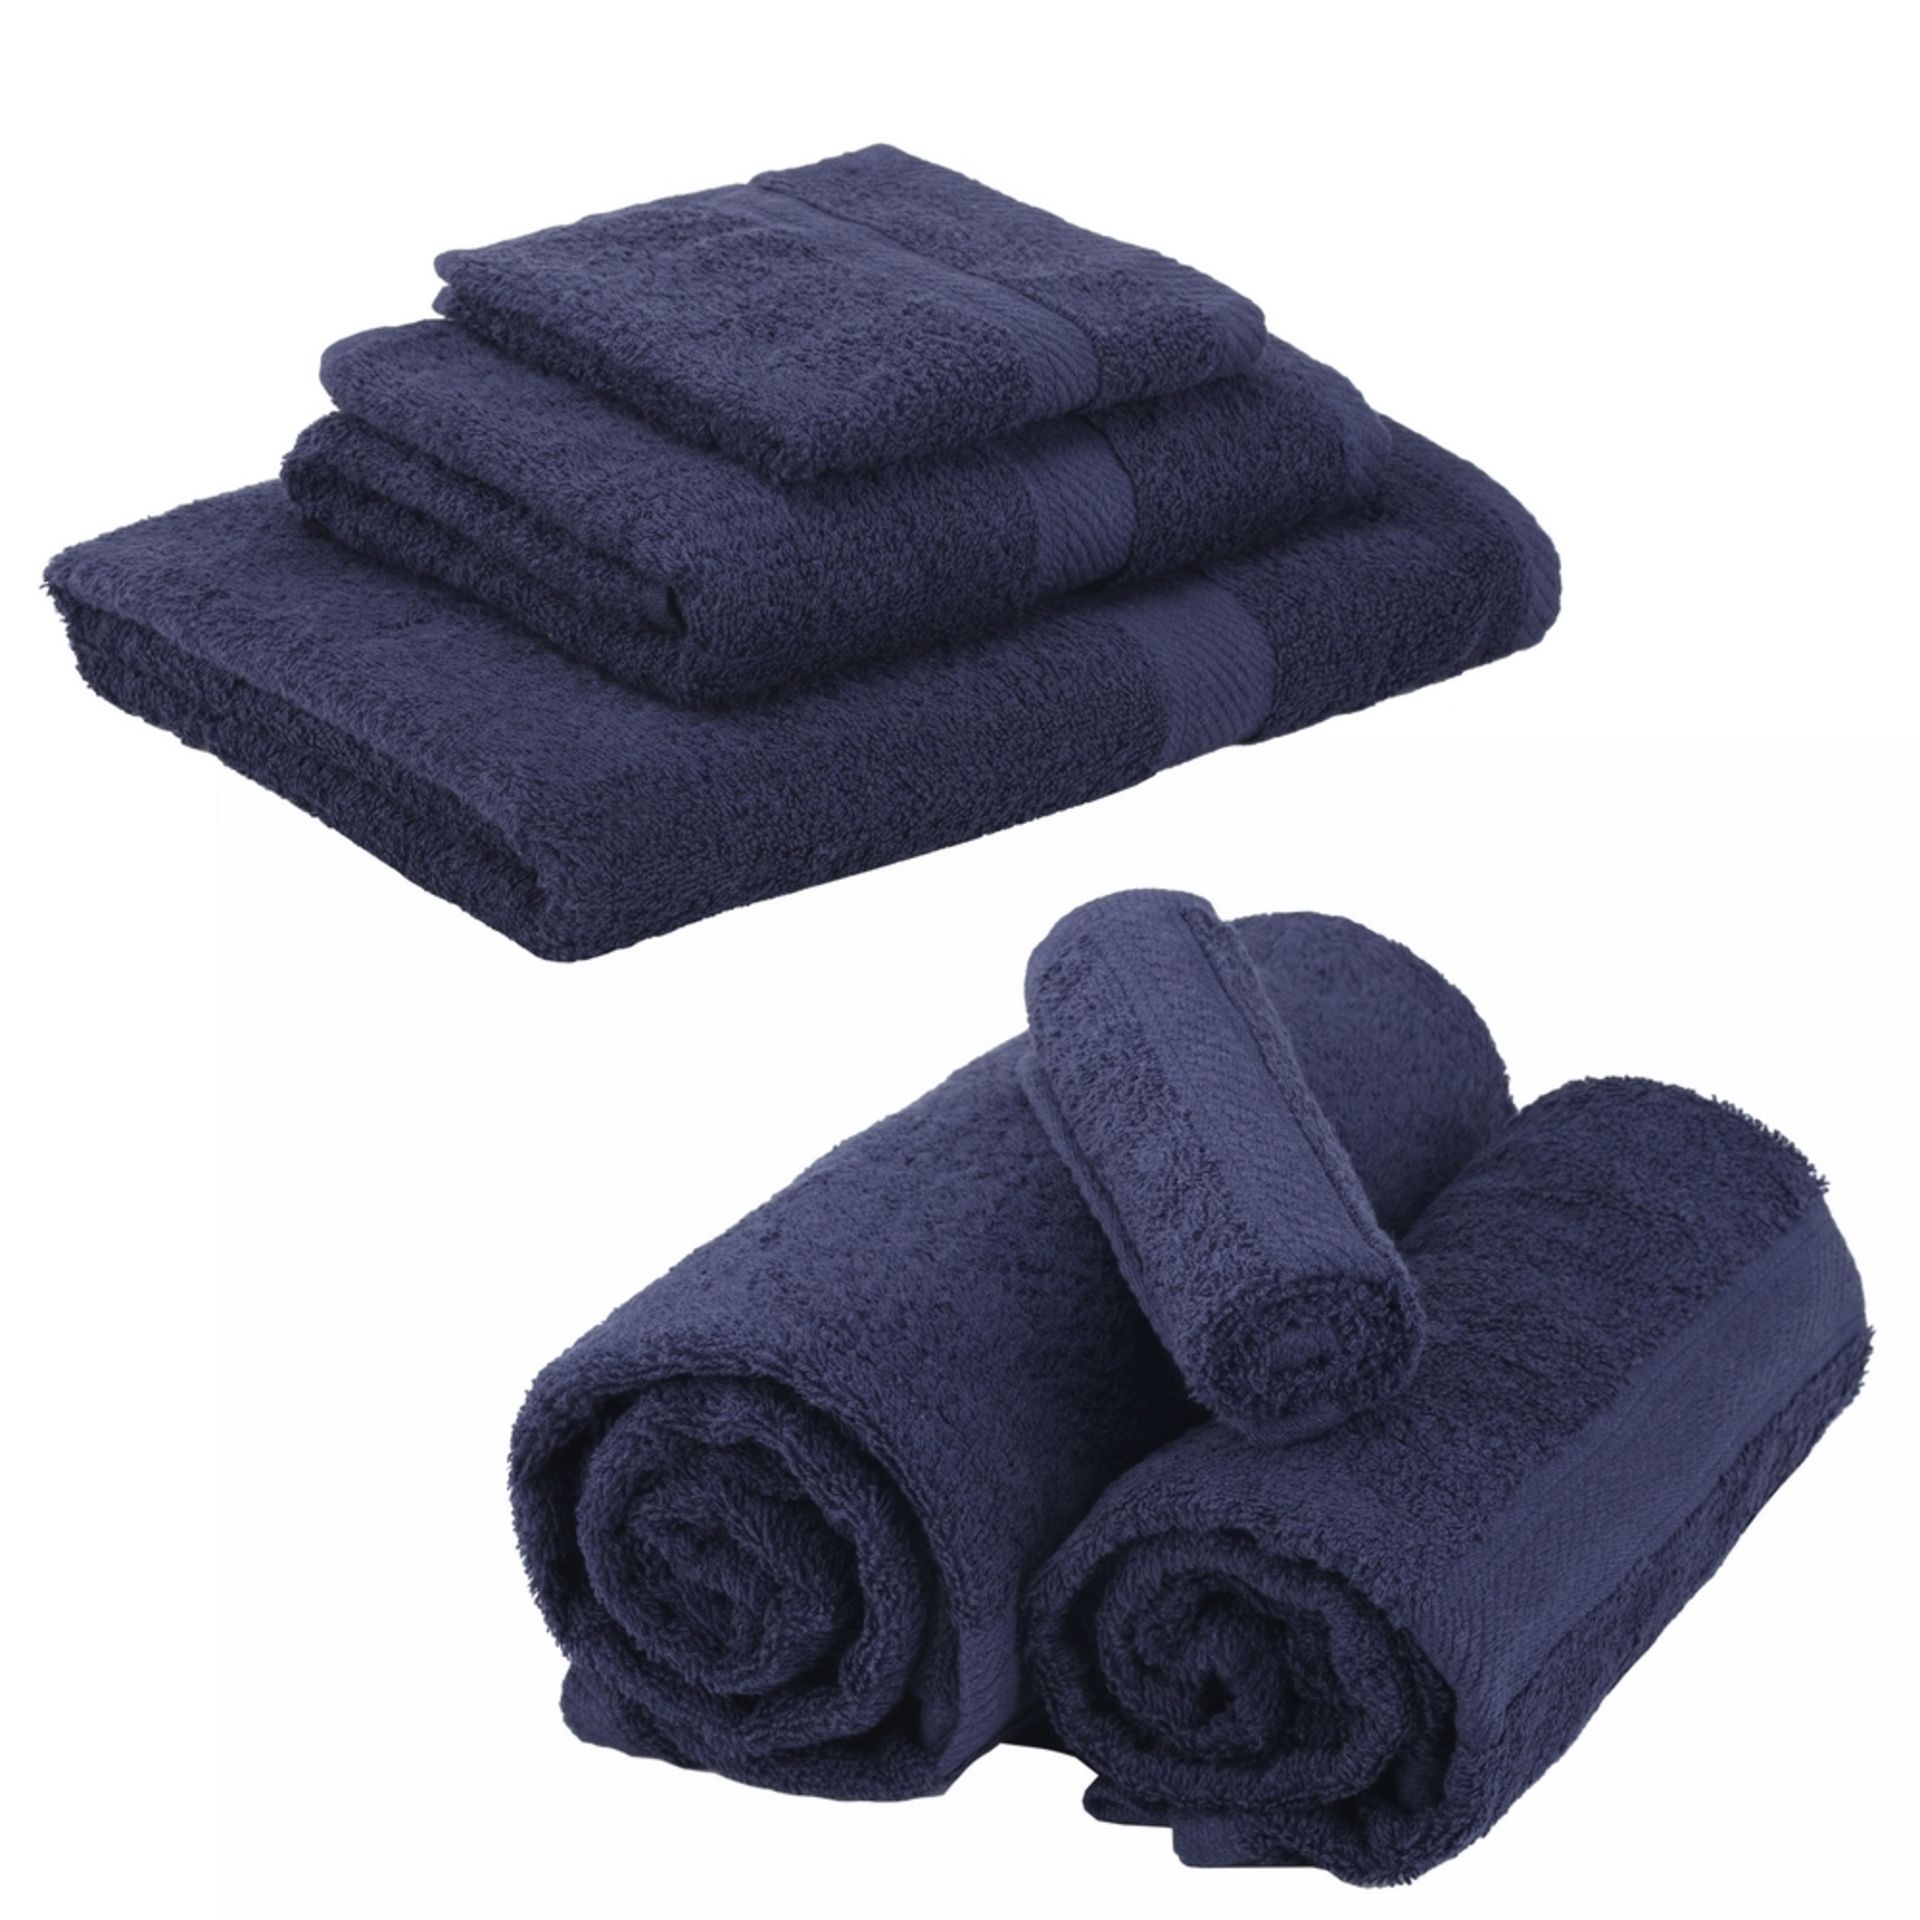 + VAT Brand New Royal Blue 6 Piece Towel Bale Set With 2 Face Towels - 2 Hand Towels And Two Bath